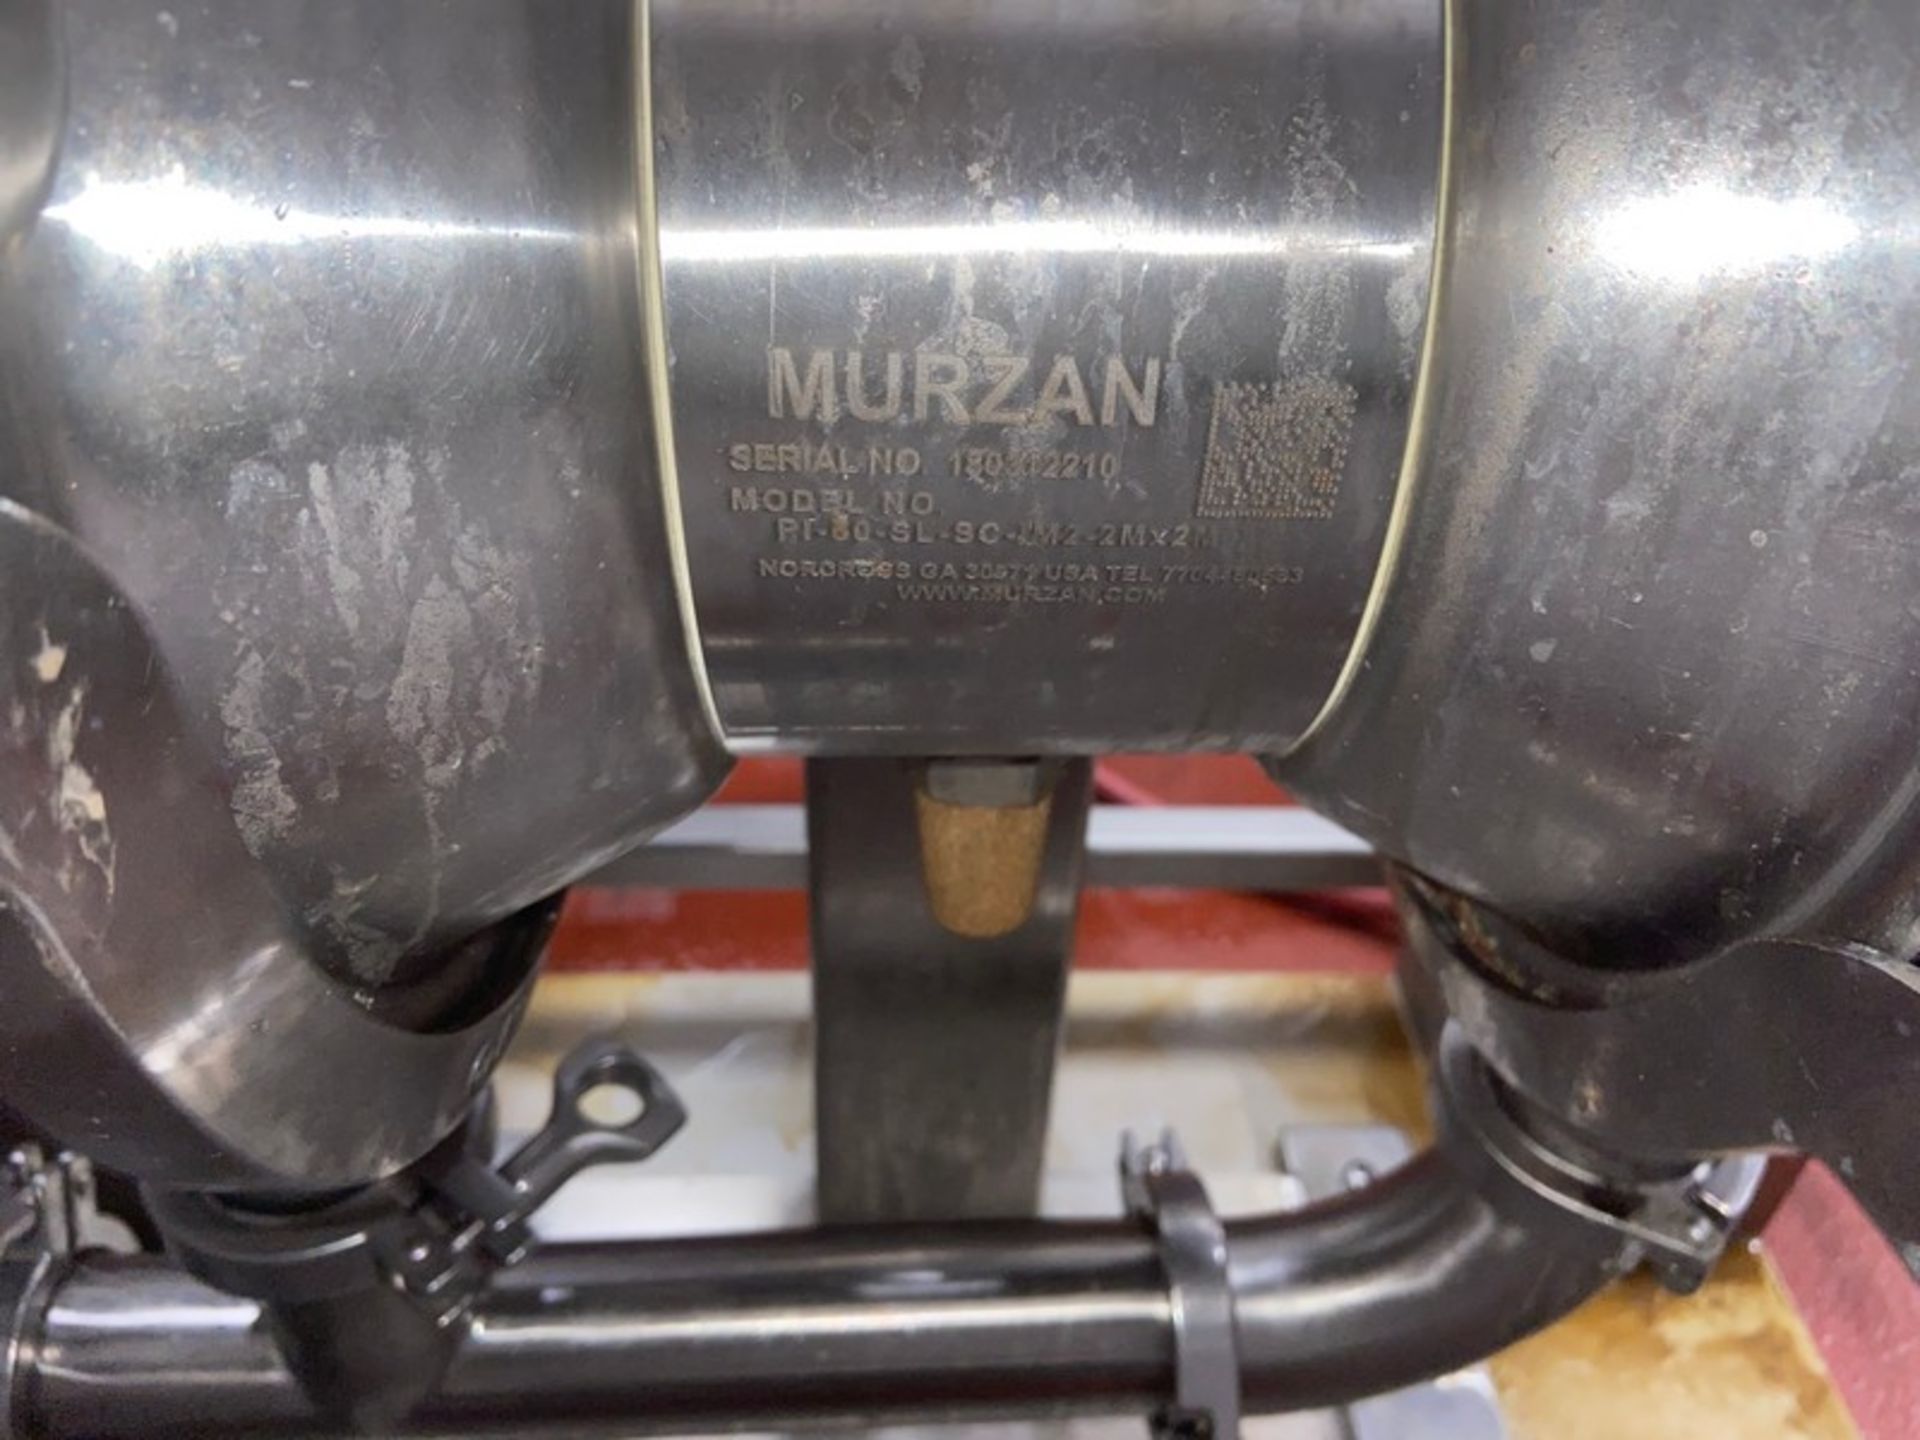 MURZAN S/S Diaphragm Pump, M/N PI-50-SL-SC-IM2-2Mx2M, with Transfer Hose, Mounted on S/S Portable - Image 6 of 7